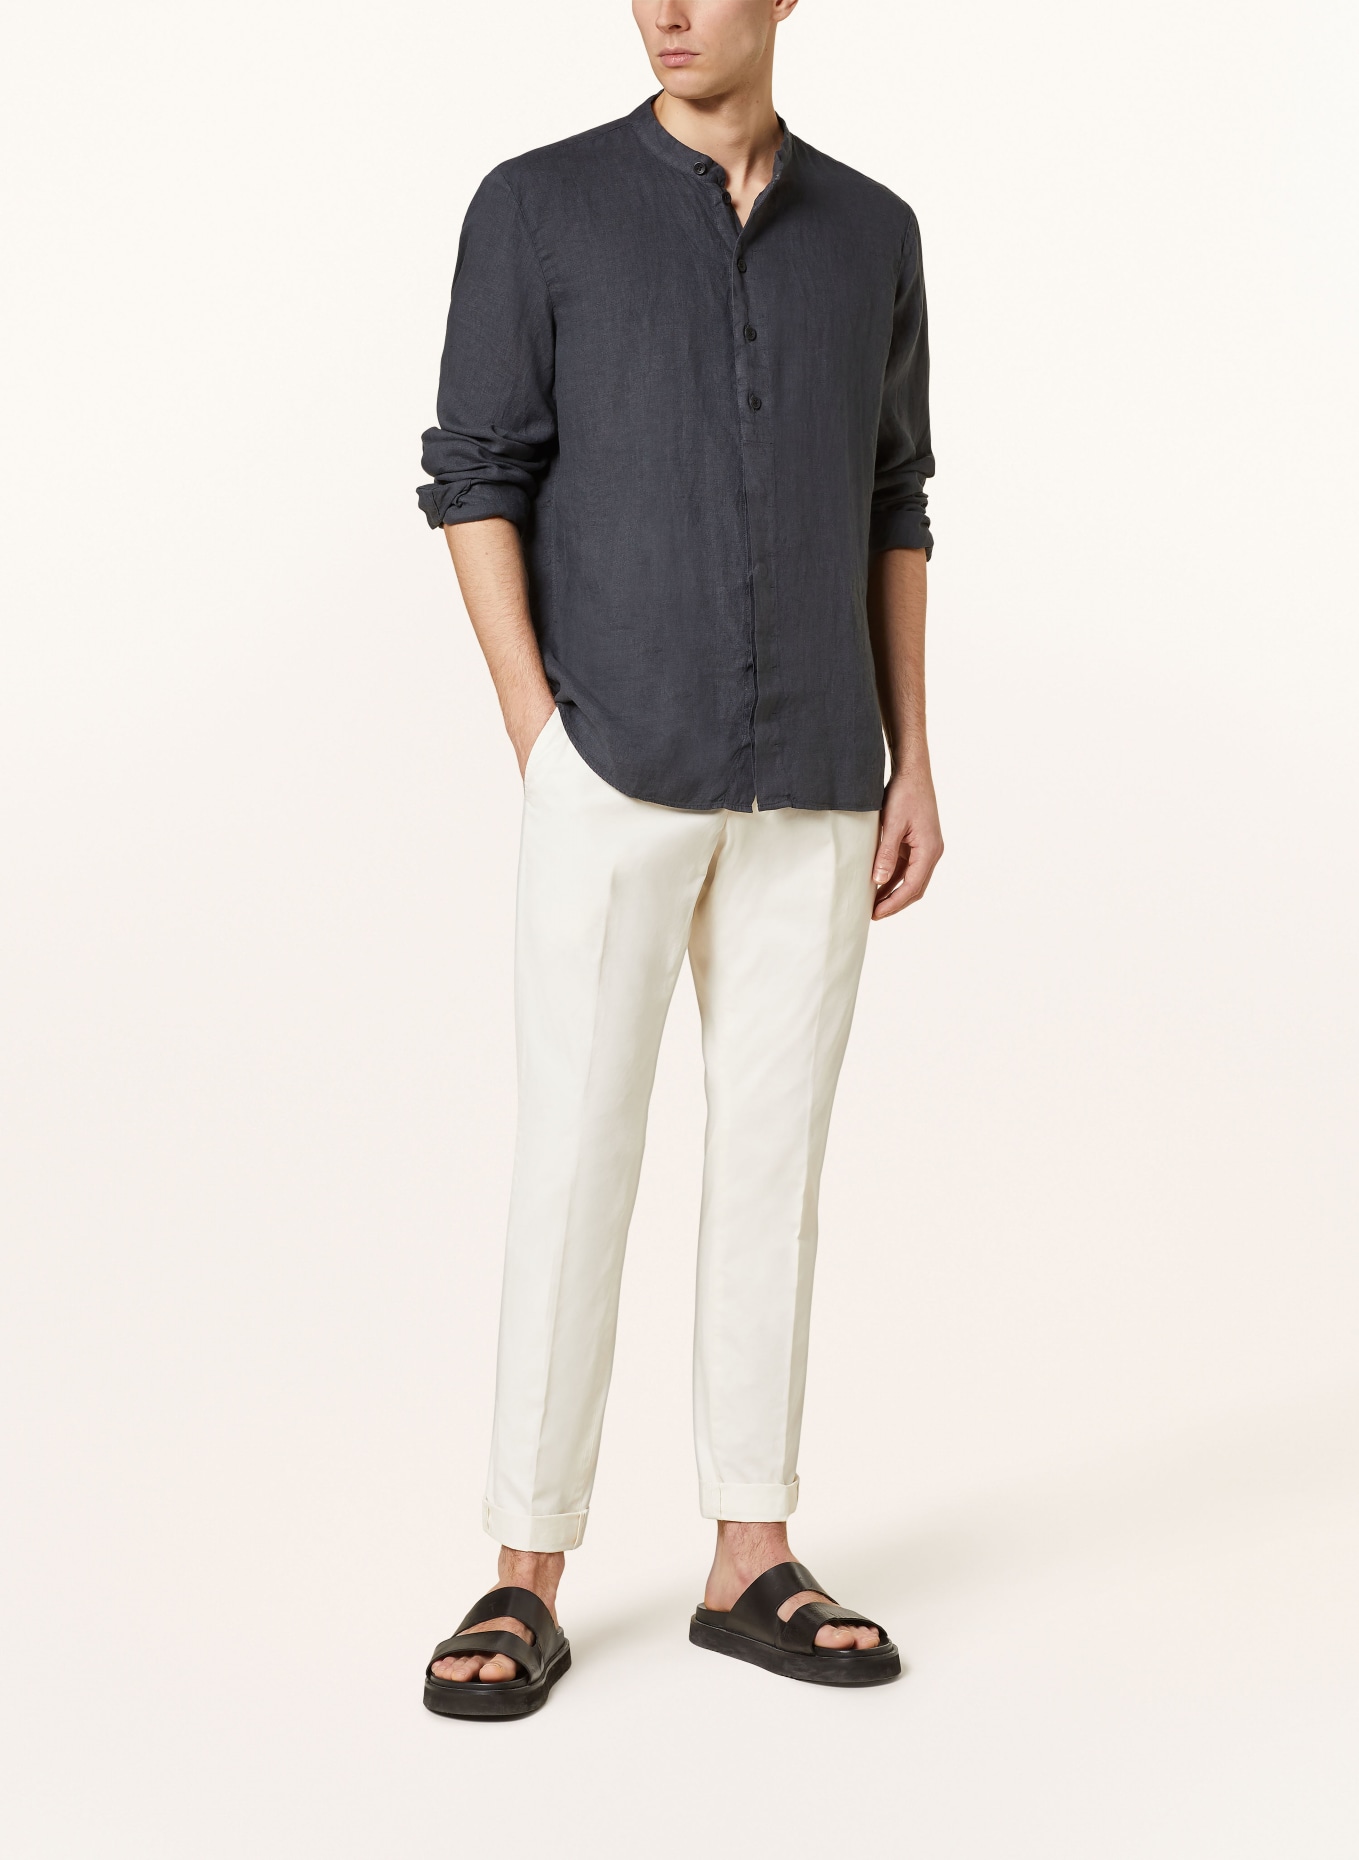 hannes roether Linen shirt TU29BS regular fit with stand-up collar, Color: DARK GRAY (Image 2)